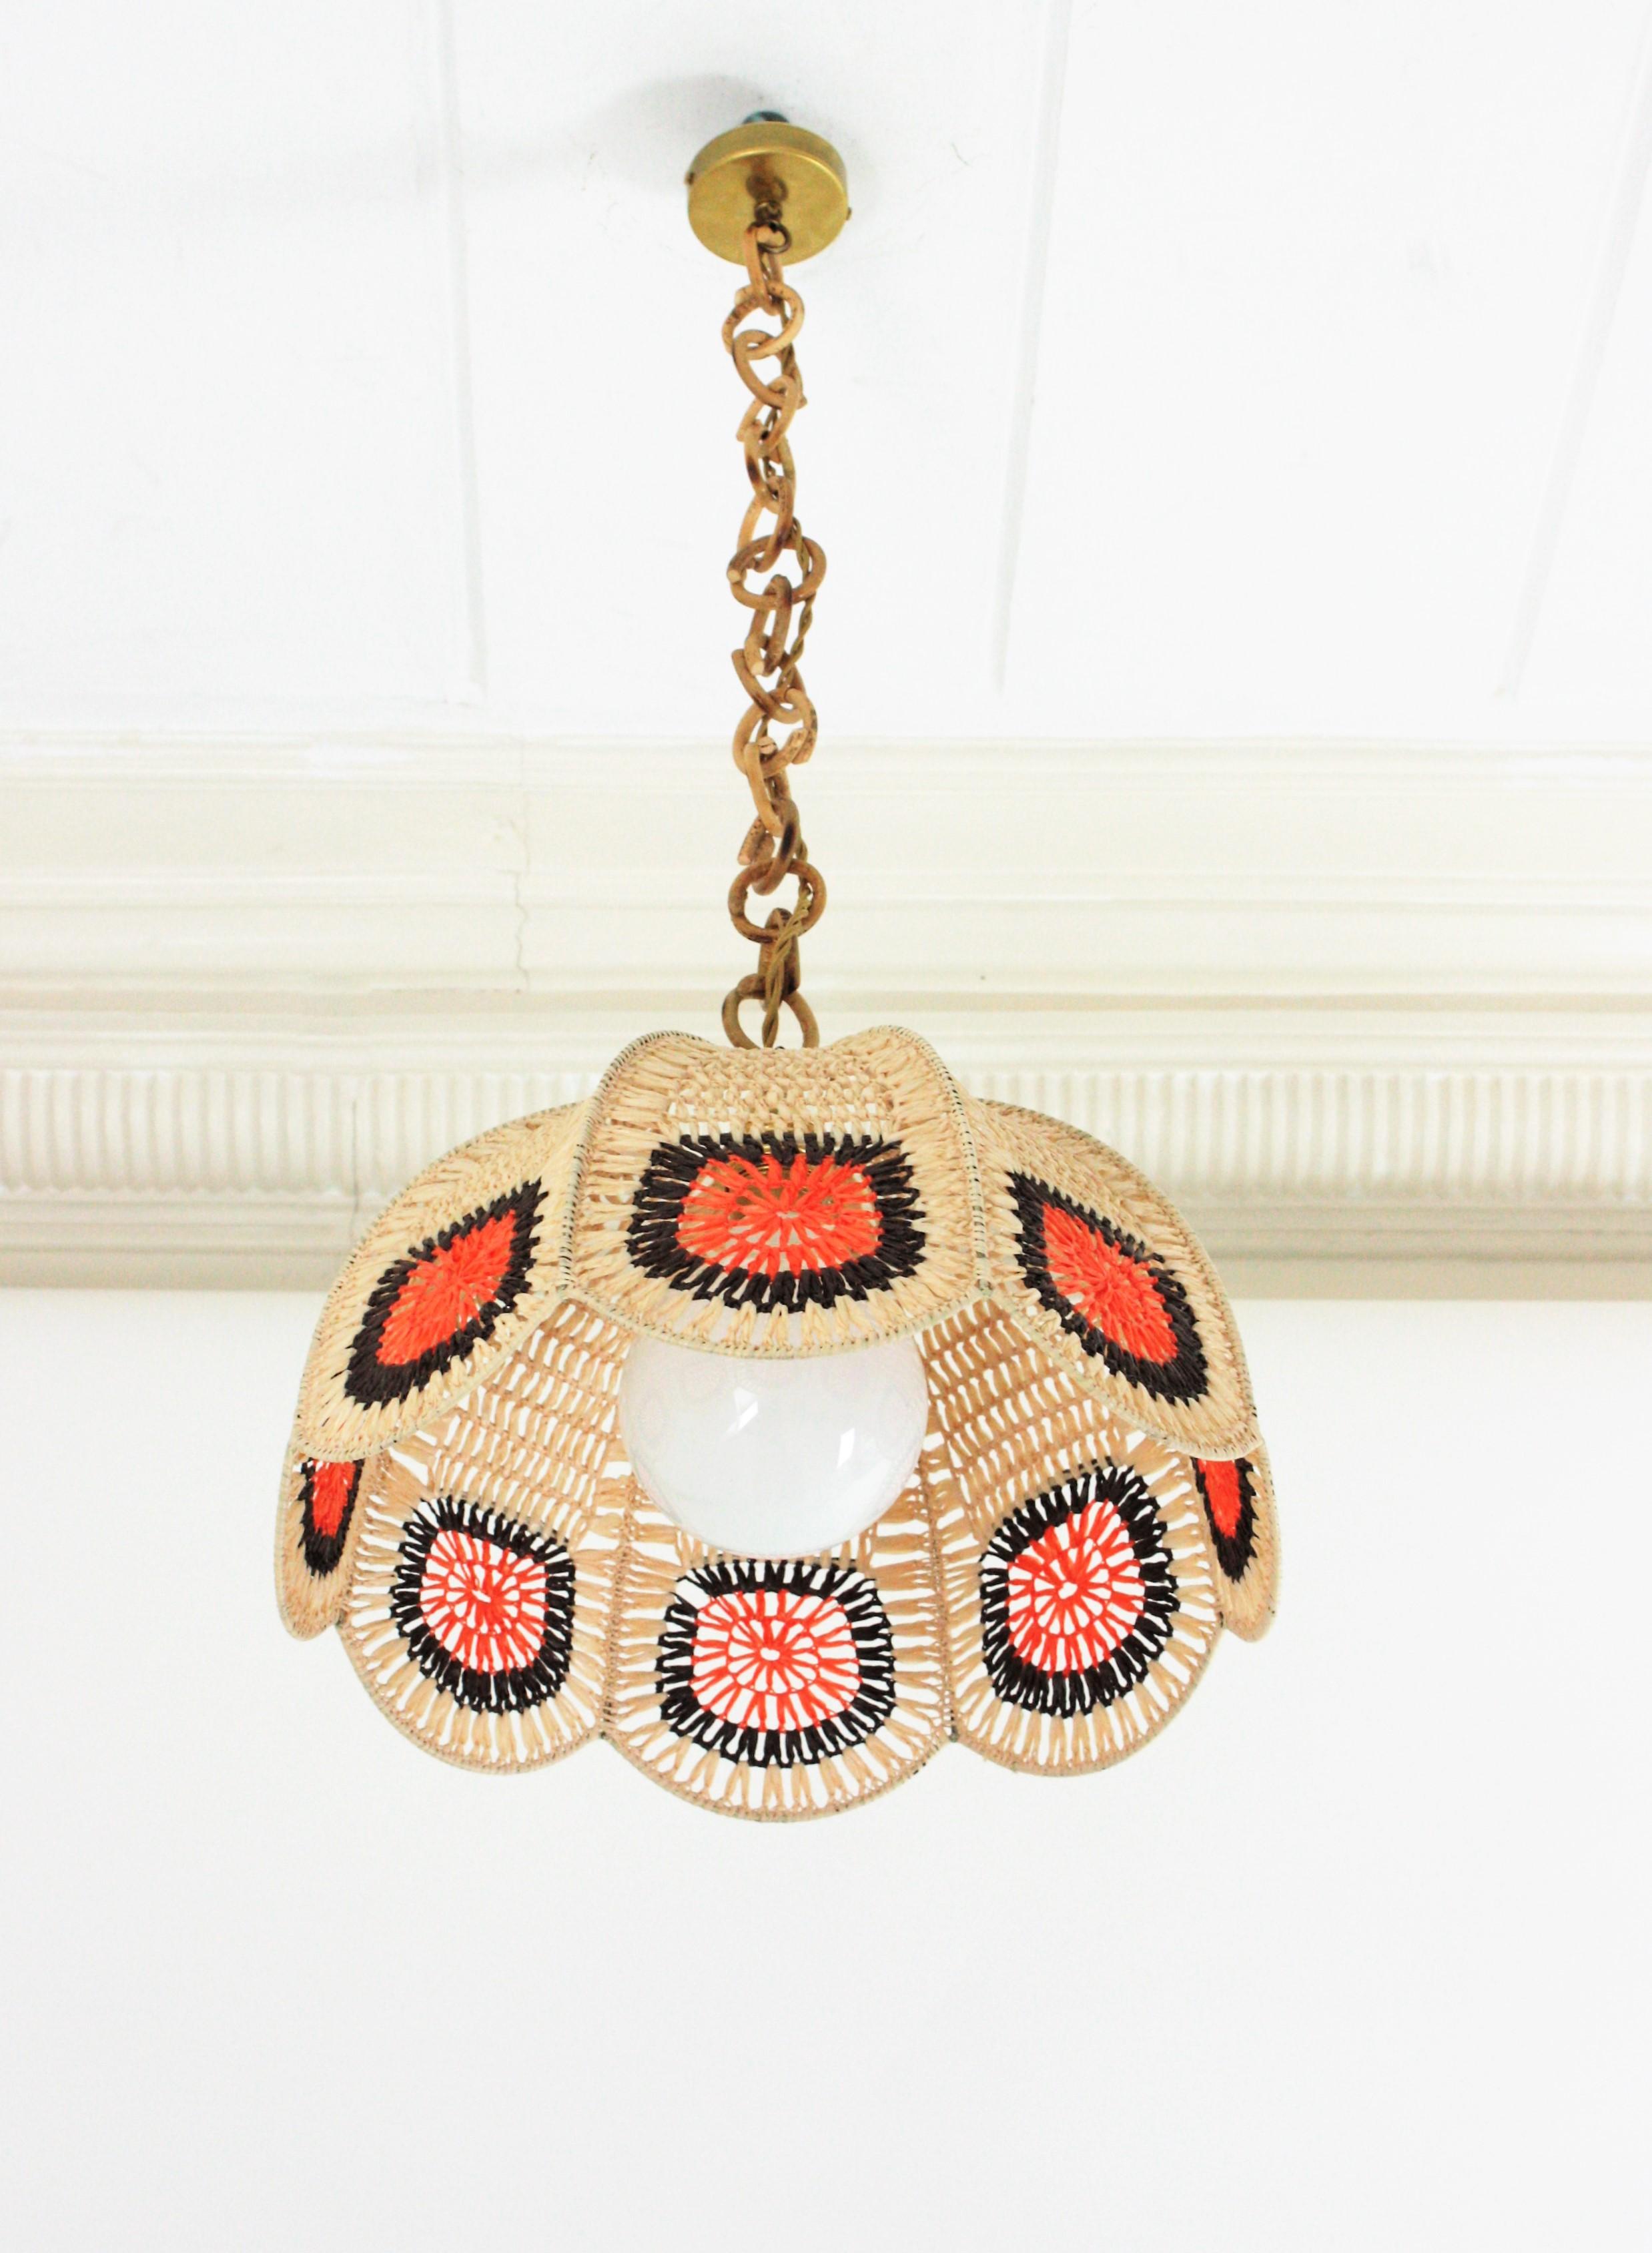 Spanish Modernist Pendant Lamp in Beige, Orange and Brown Macrame For Sale 8